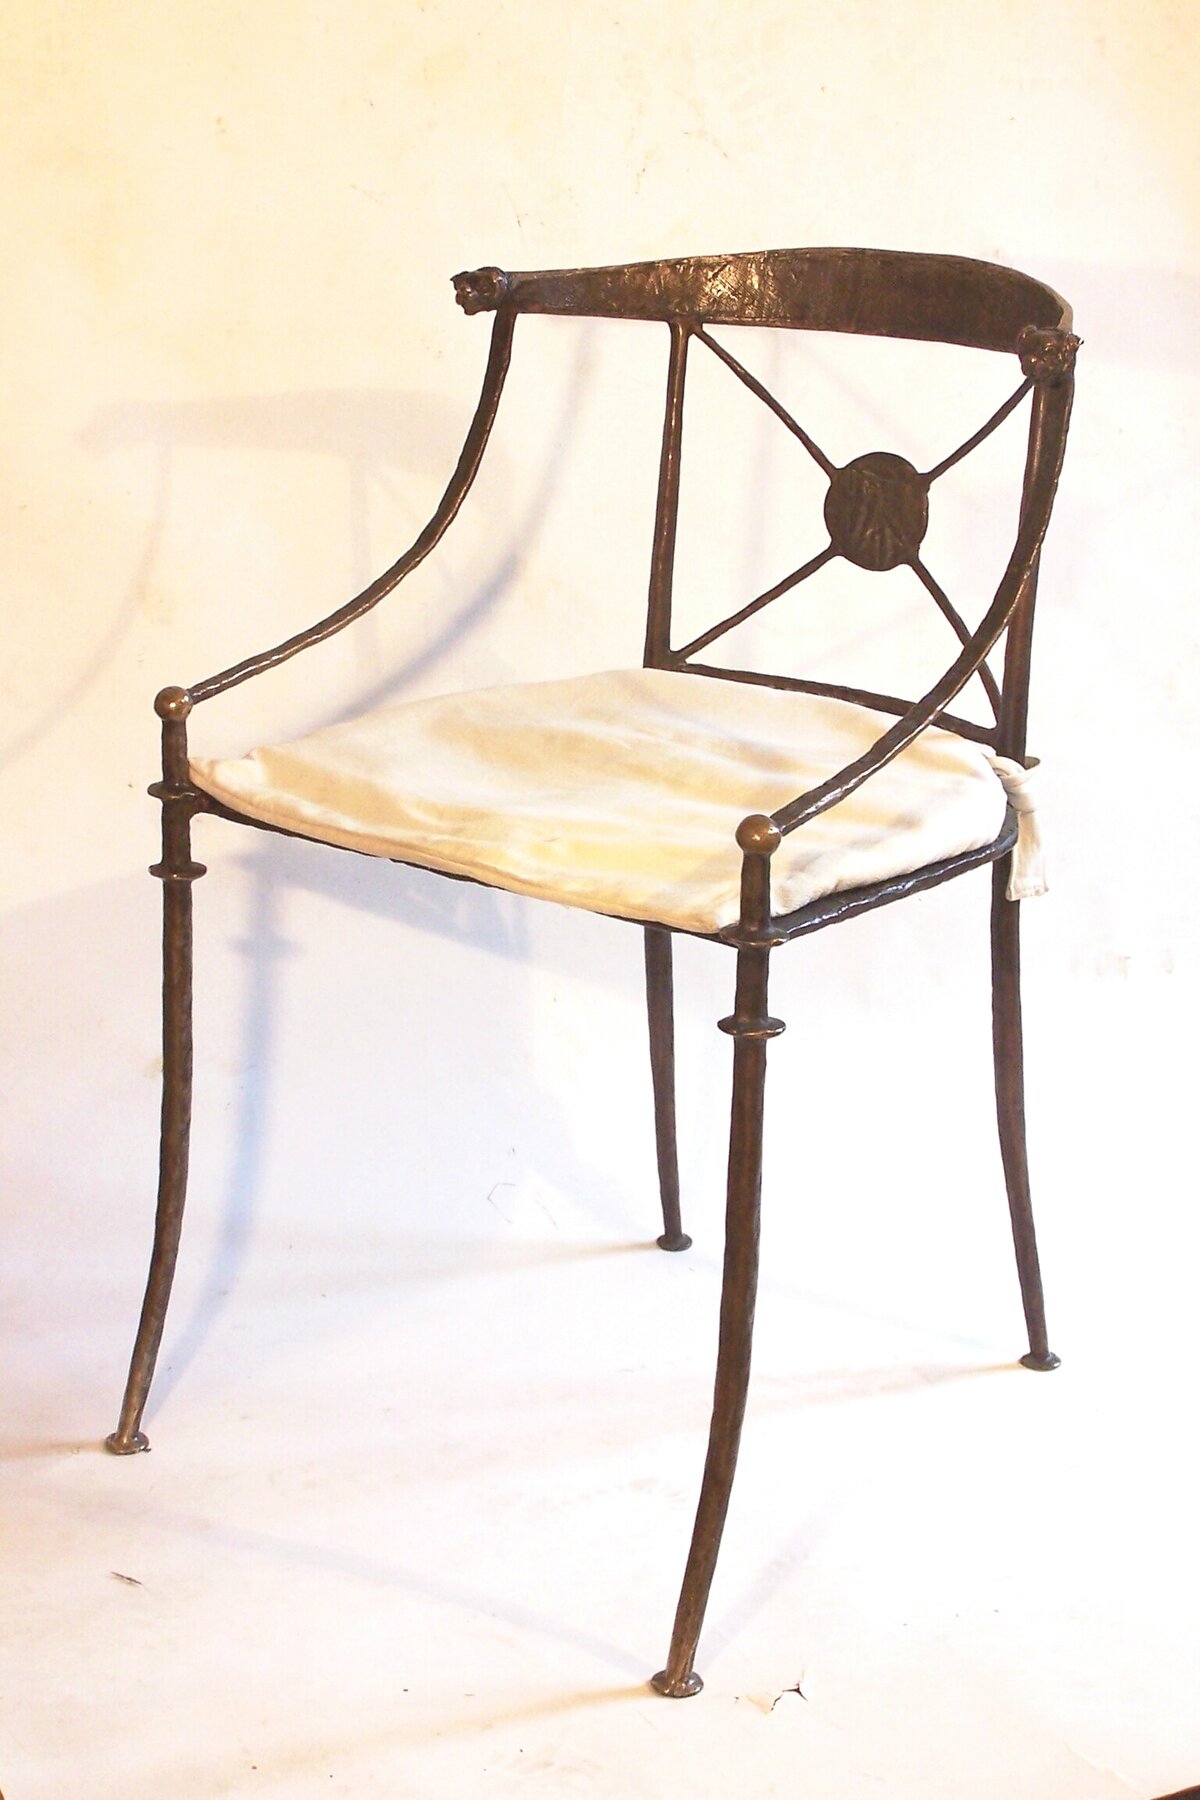 bronze chair with thin legs and a white seat